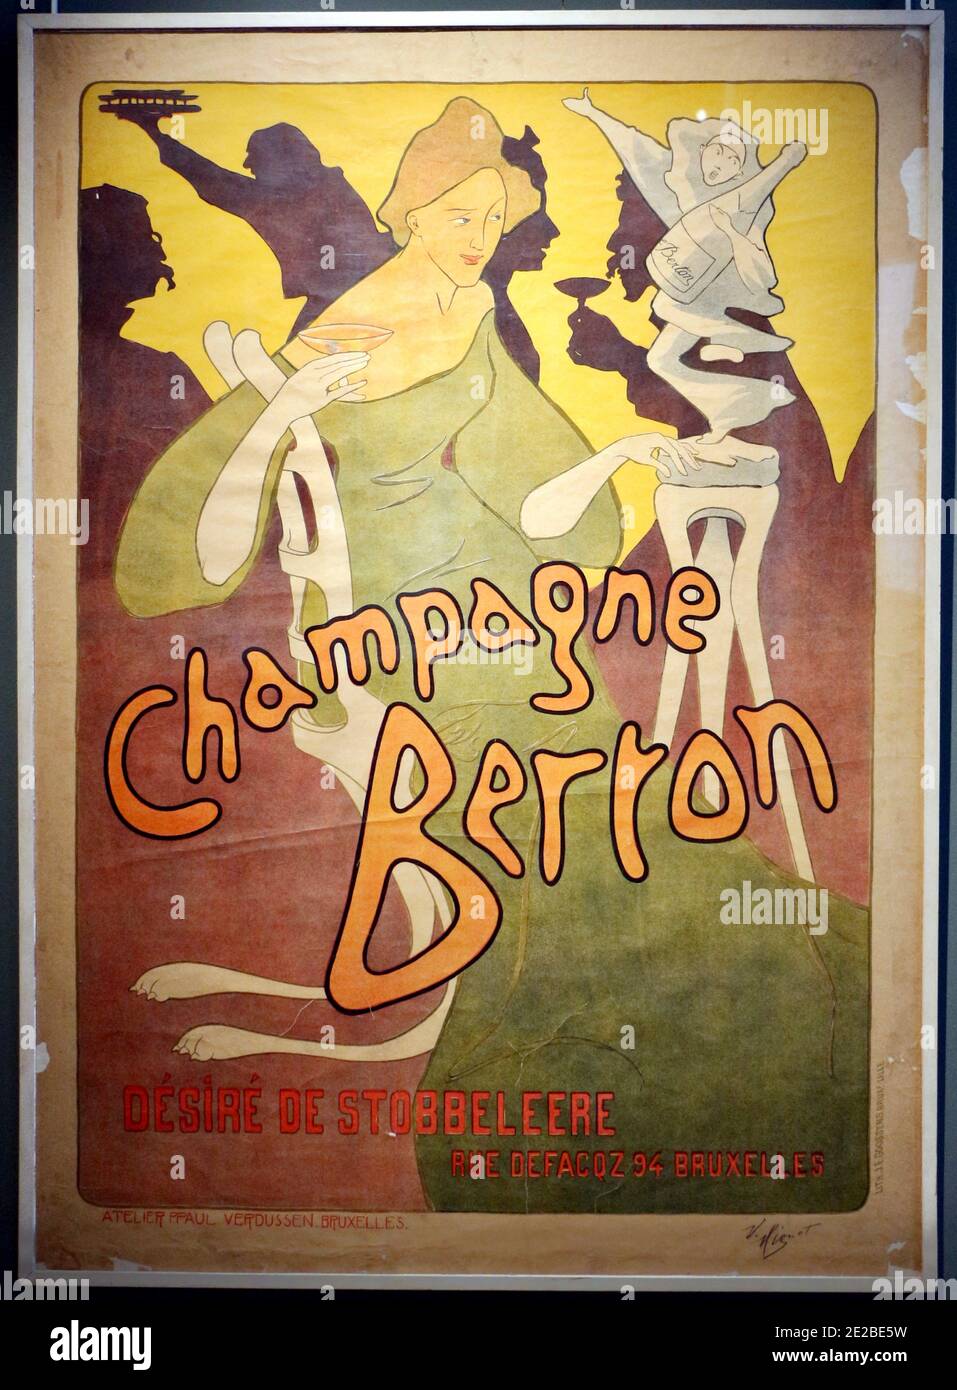 Vintage Campagne Berton advertising poster designed by Victor Mignot. Stock Photo